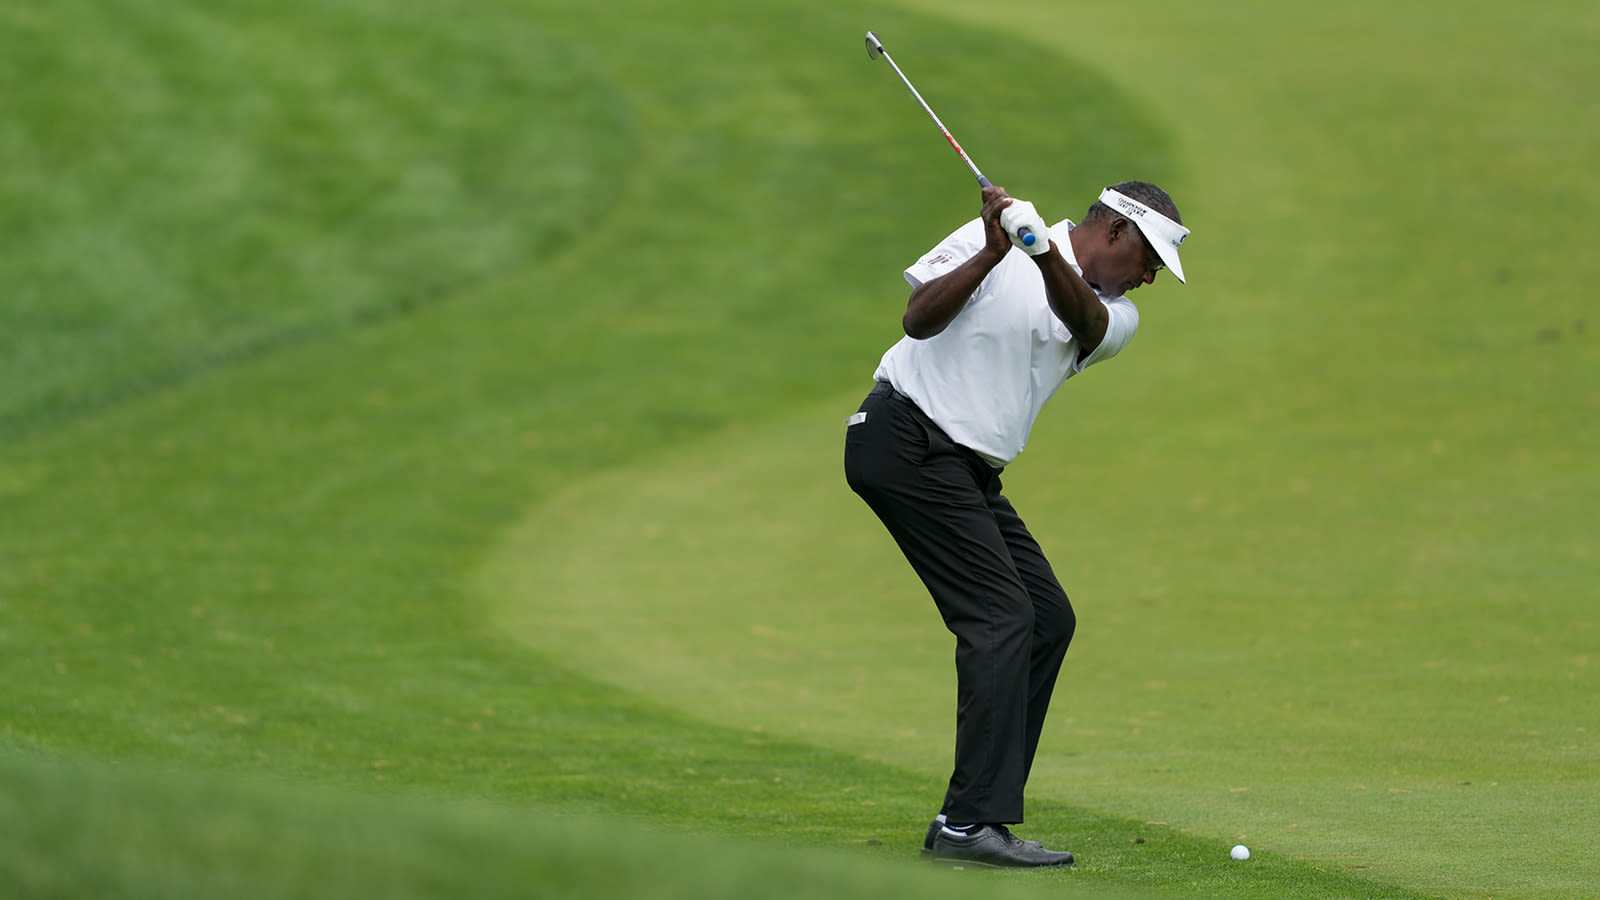 Vijay Singh of Fiji hits out of the fairway on the second hole during the second round for the 80th KitchenAid Senior PGA Championship held at Oak Hill Country Club on May 24, 2019 in Rochester, New York. (Photo by Montana Pritchard/PGA of America)